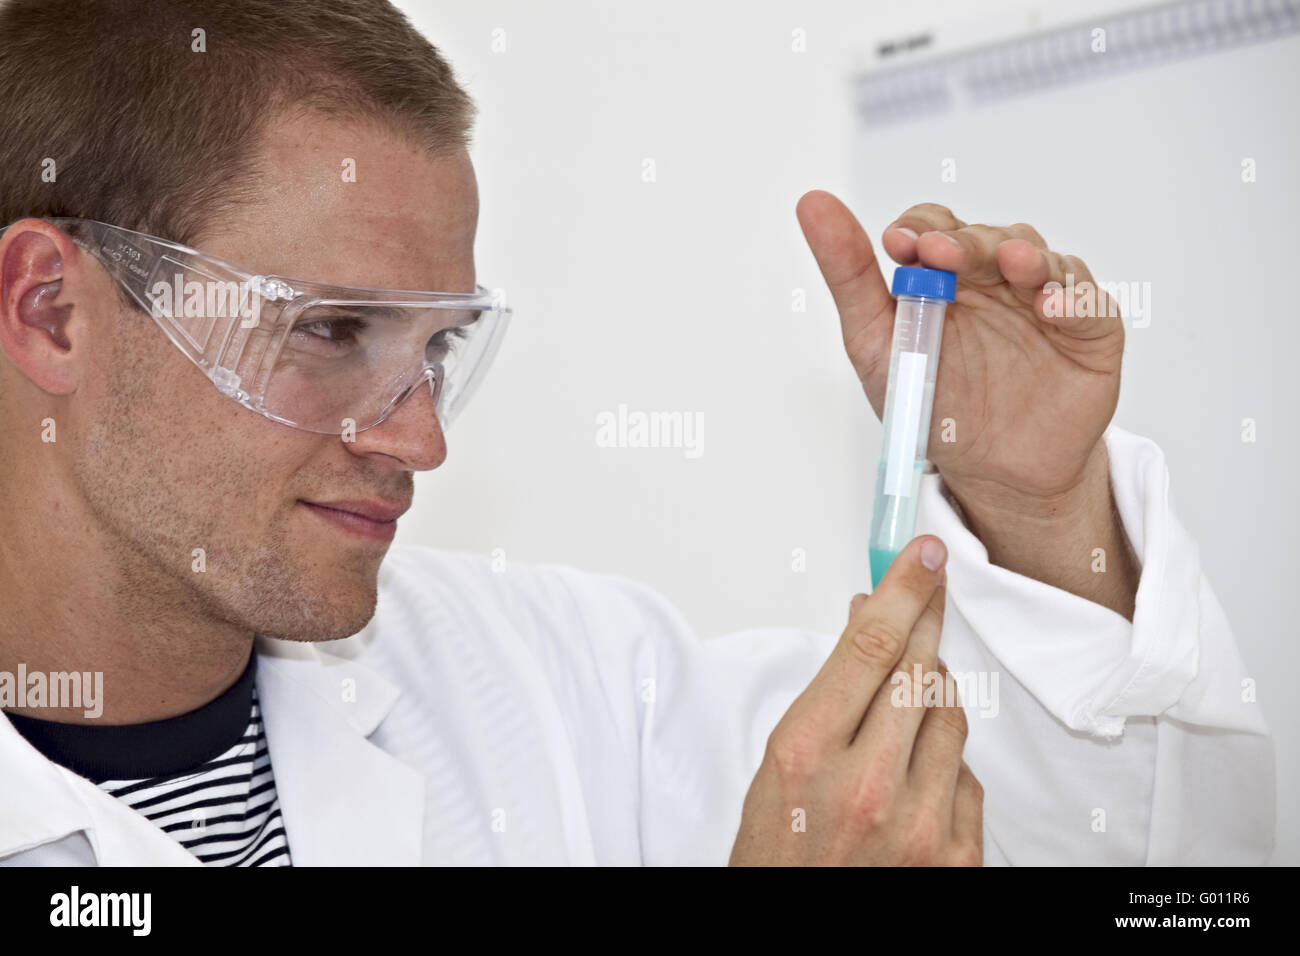 young lab technician looking a at medical sample Stock Photo